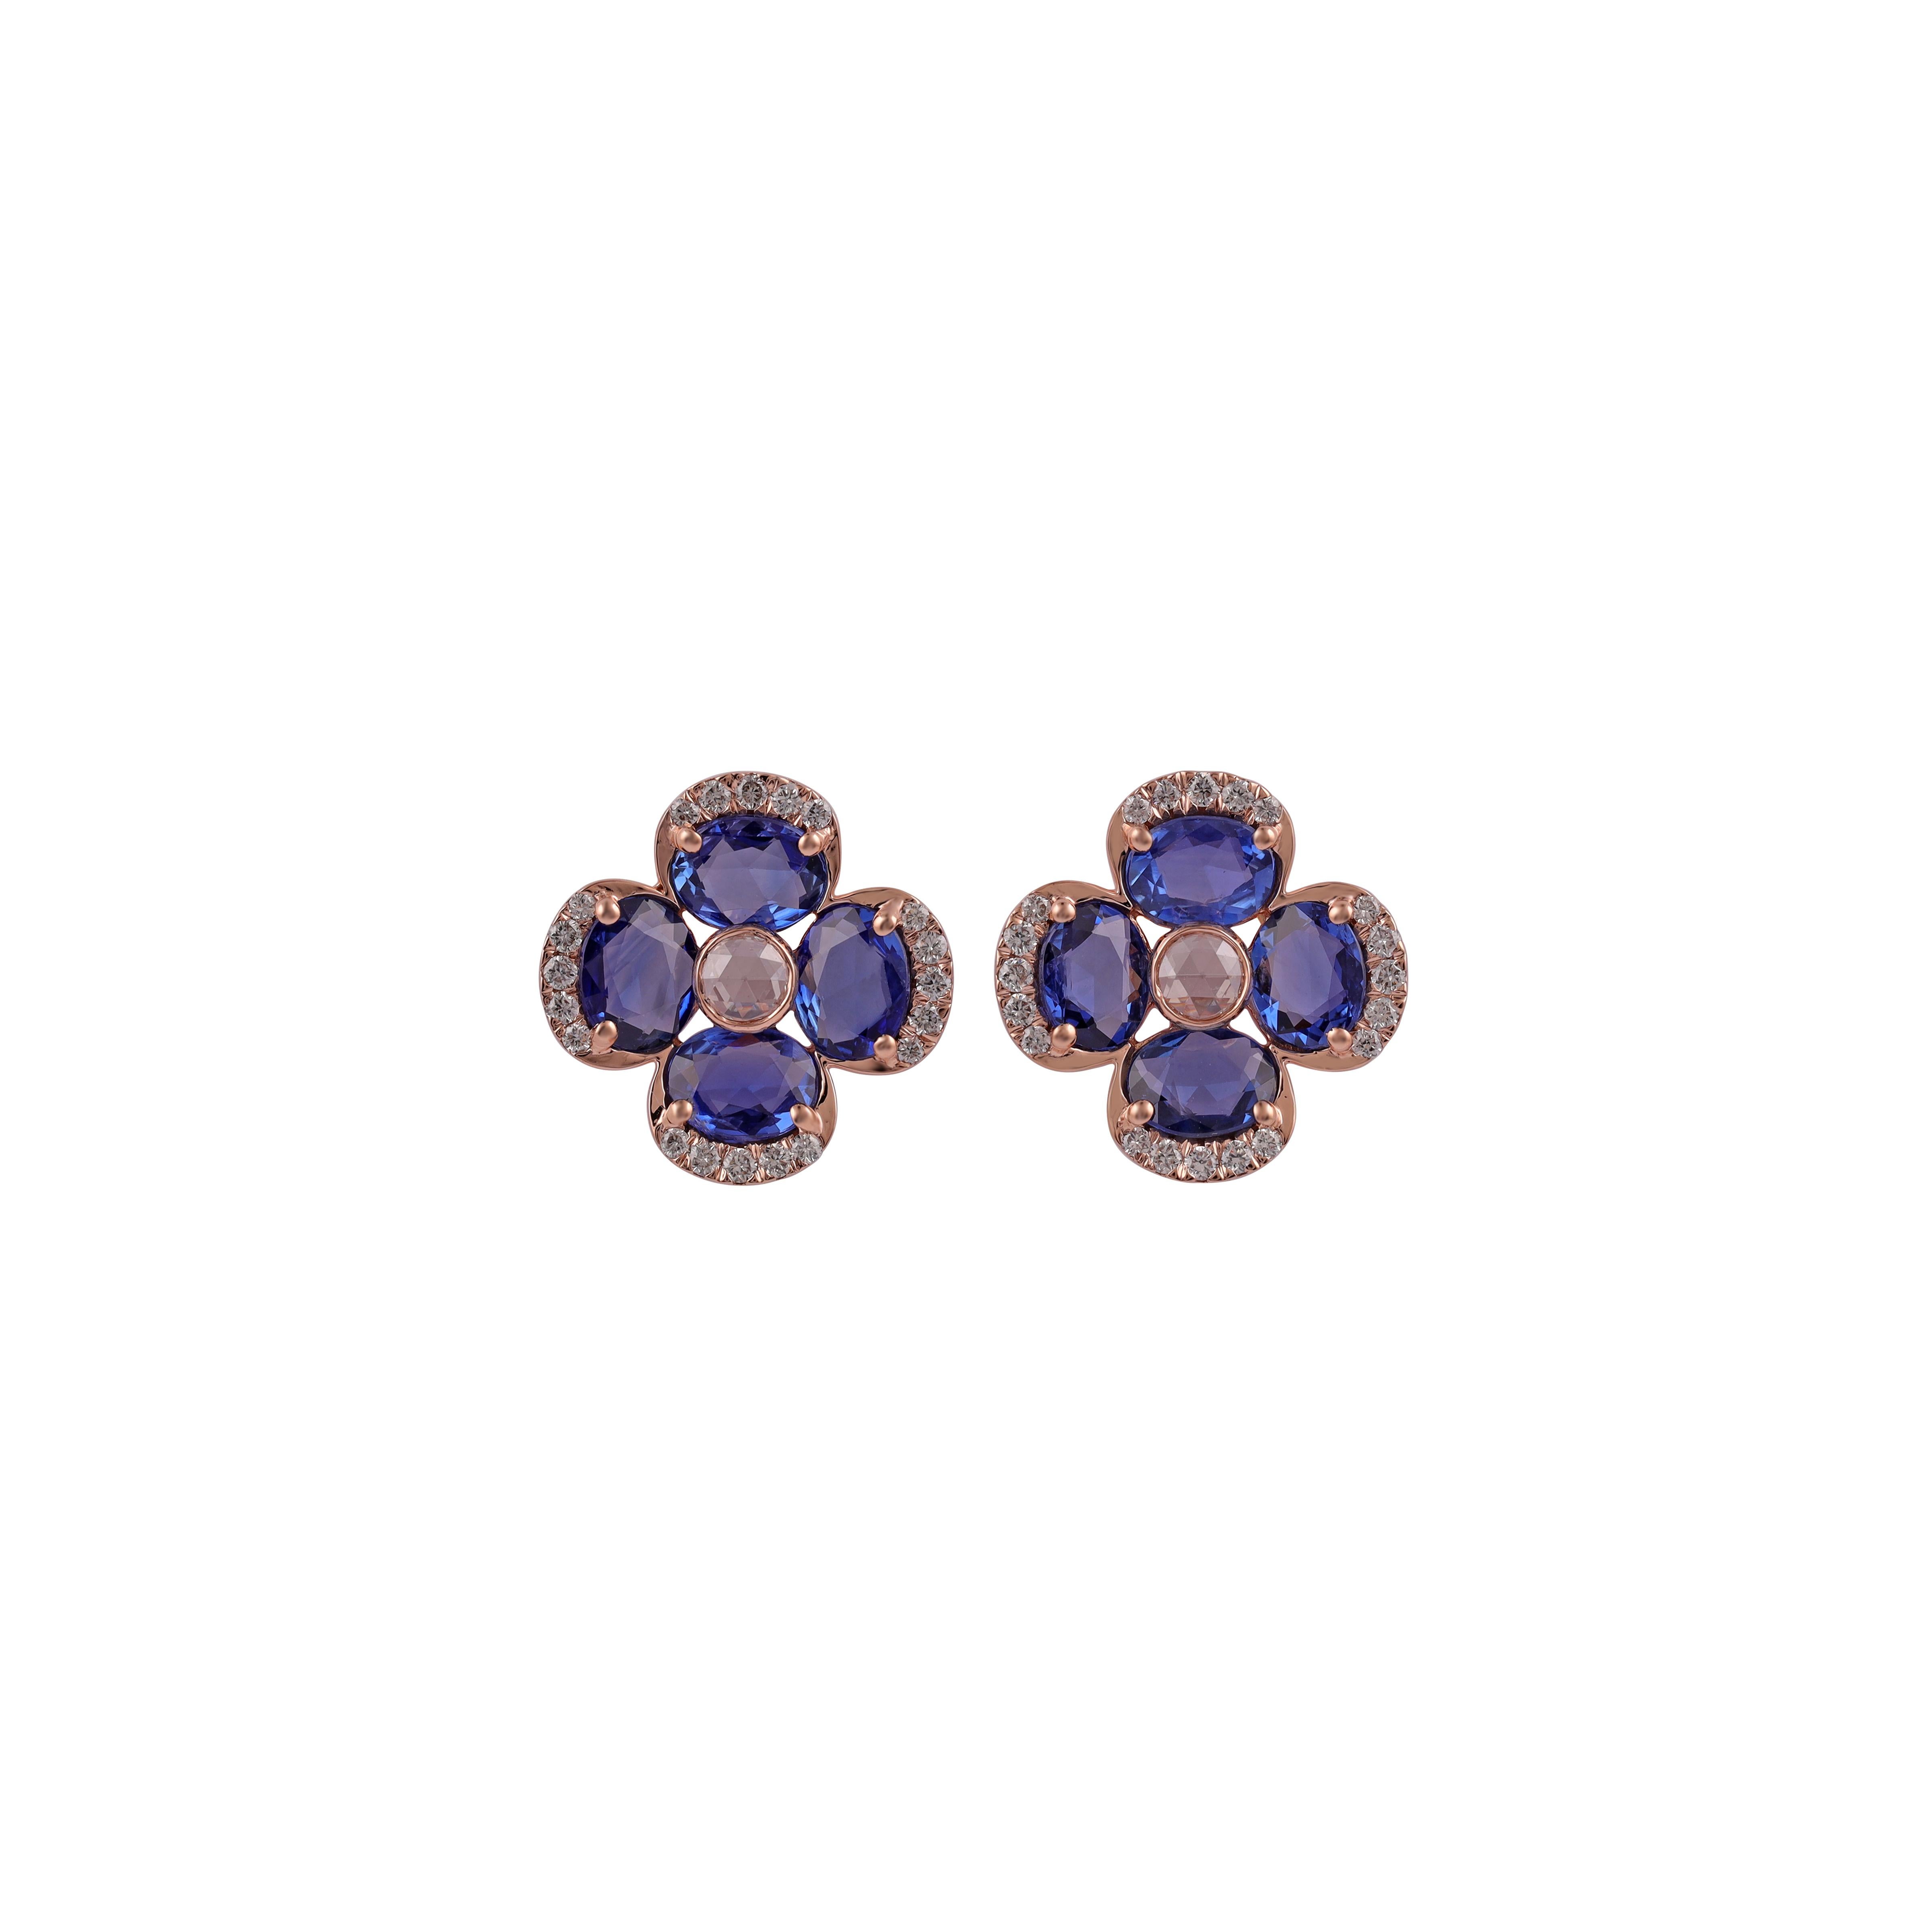 A stunning, fine and impressive pair of  2.71 carat blue sapphire and 0.22 carat Round diamond,0.10 carat Rose cut Diamond with Solid 18k Rose Gold. 

Studs create a subtle beauty while showcasing the colors of the natural precious gemstones and